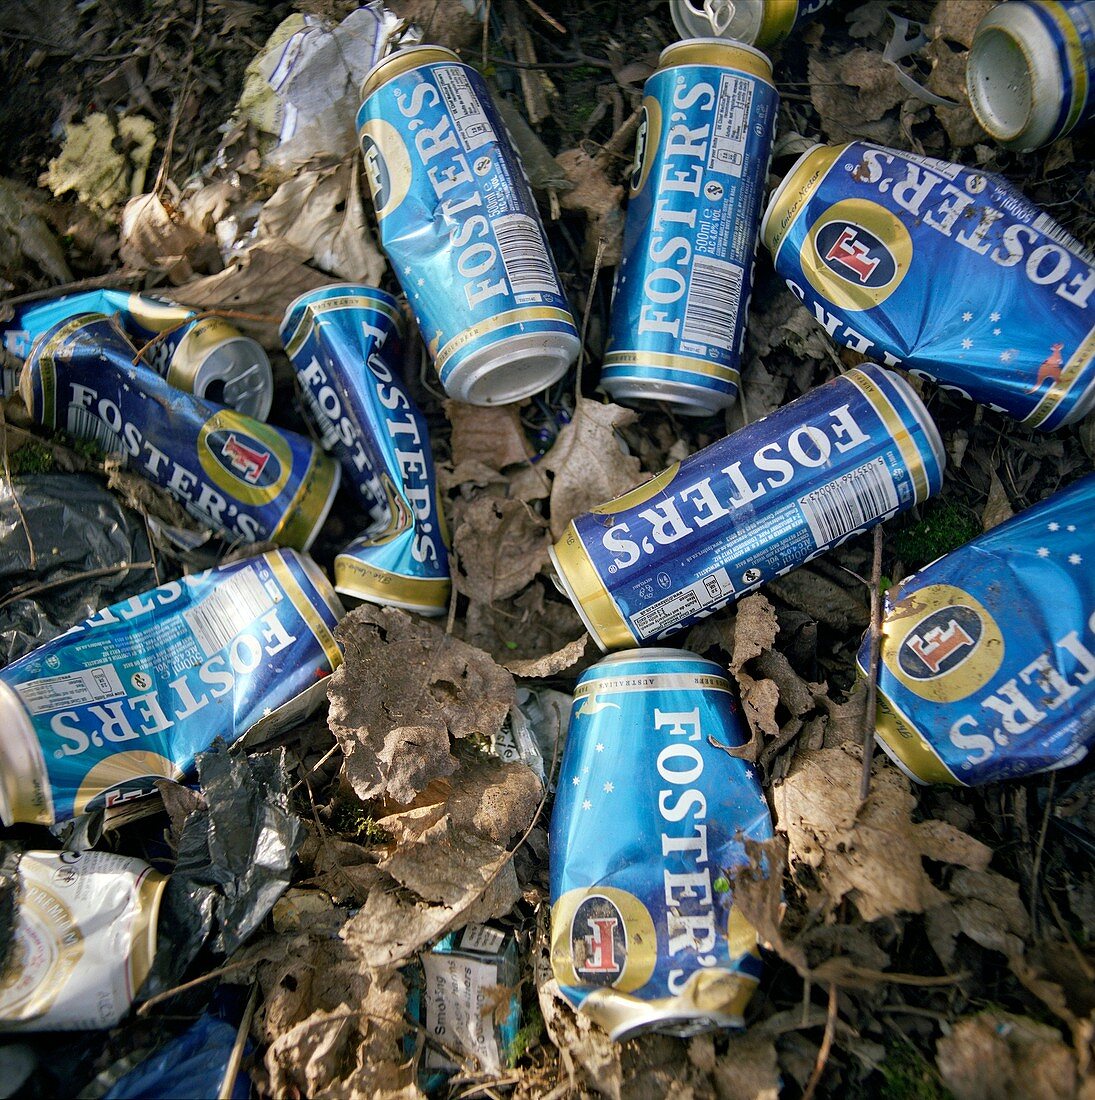 Discarded larger cans